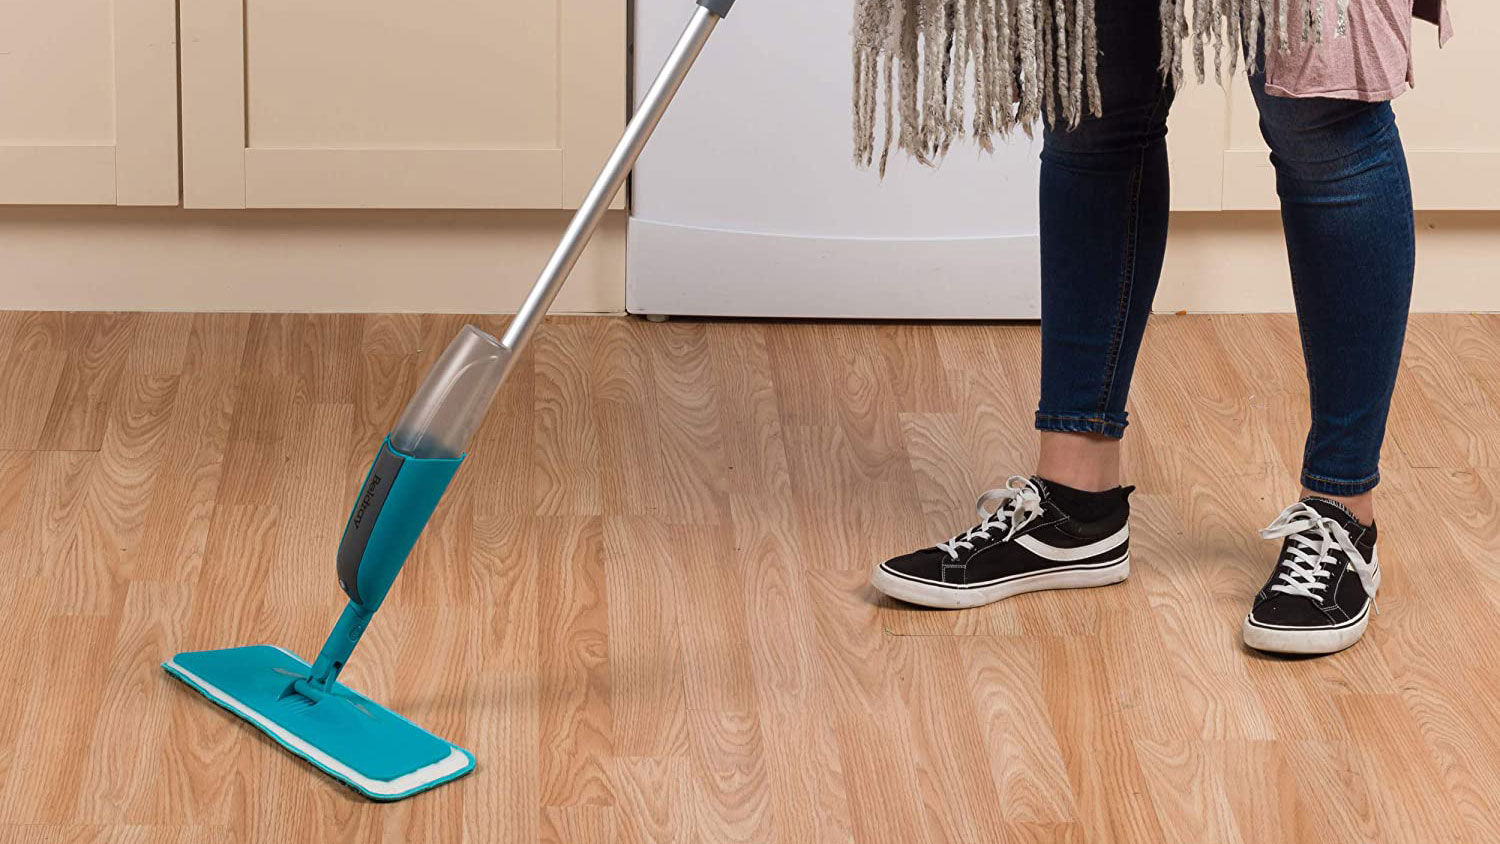 Best Mop 2021 Tried And Tested, Eco Mop For Laminate Floors